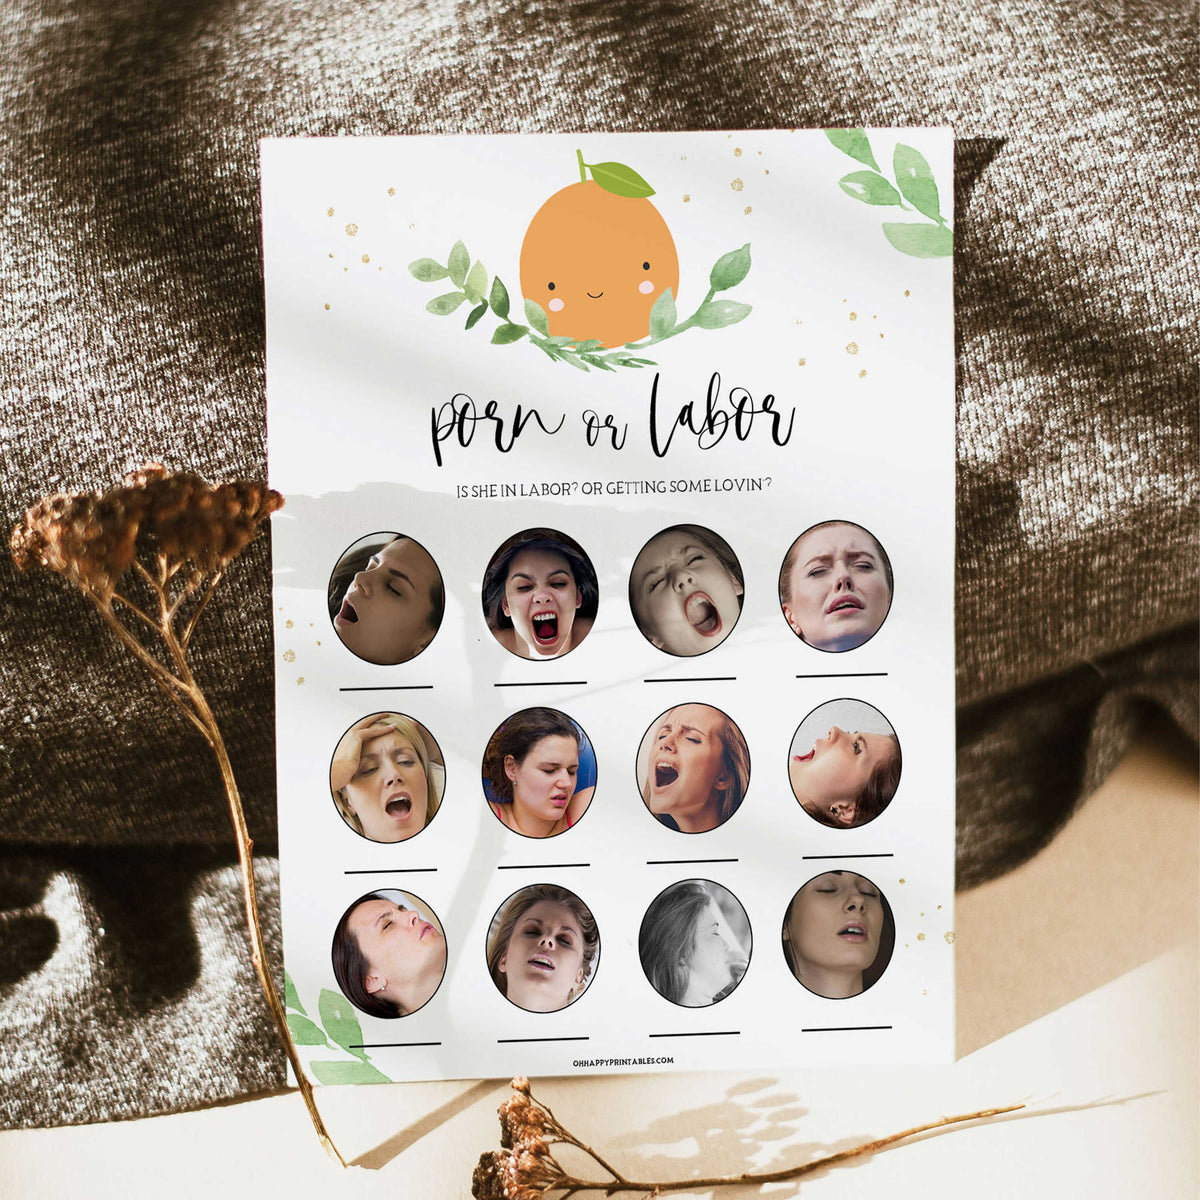 porn or labor baby game, Printable baby shower games, little cutie baby games, baby shower games, fun baby shower ideas, top baby shower ideas, little cutie baby shower, baby shower games, fun little cutie baby shower ideas